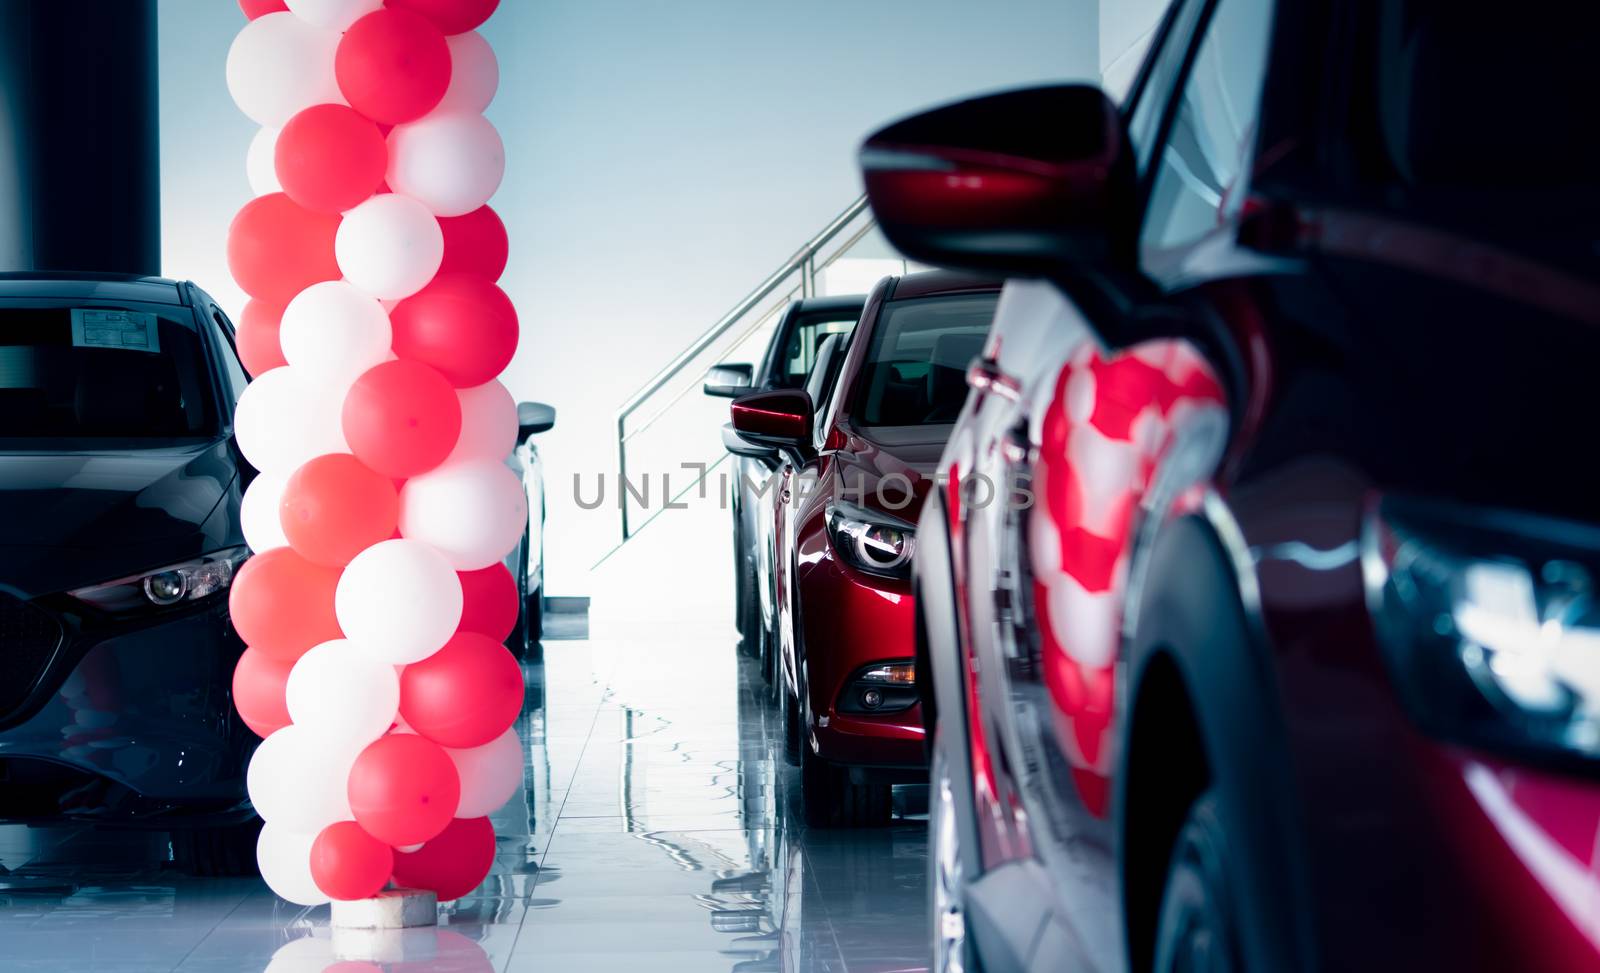 New and shiny luxury SUV car parked in modern showroom with sale promotion events. Car dealership office. Electric car business. Automobile leasing. Automotive industry. Showroom decor with balloons.